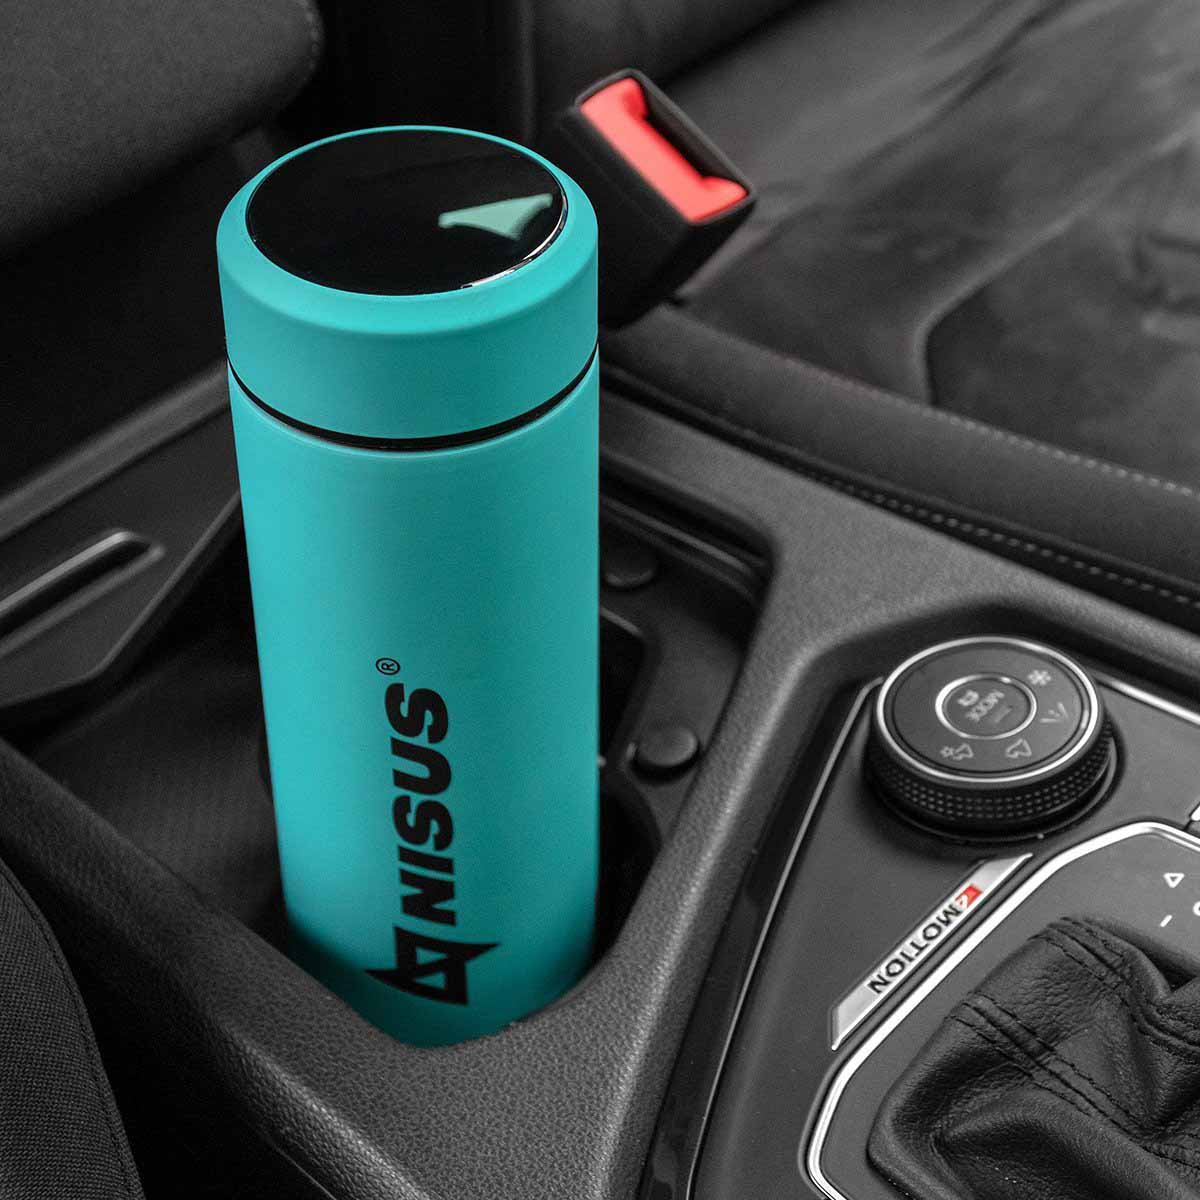 Stainless Insulated Water Bottle with LED Temperature Display, 15 oz perfectly fits your cur cup holder